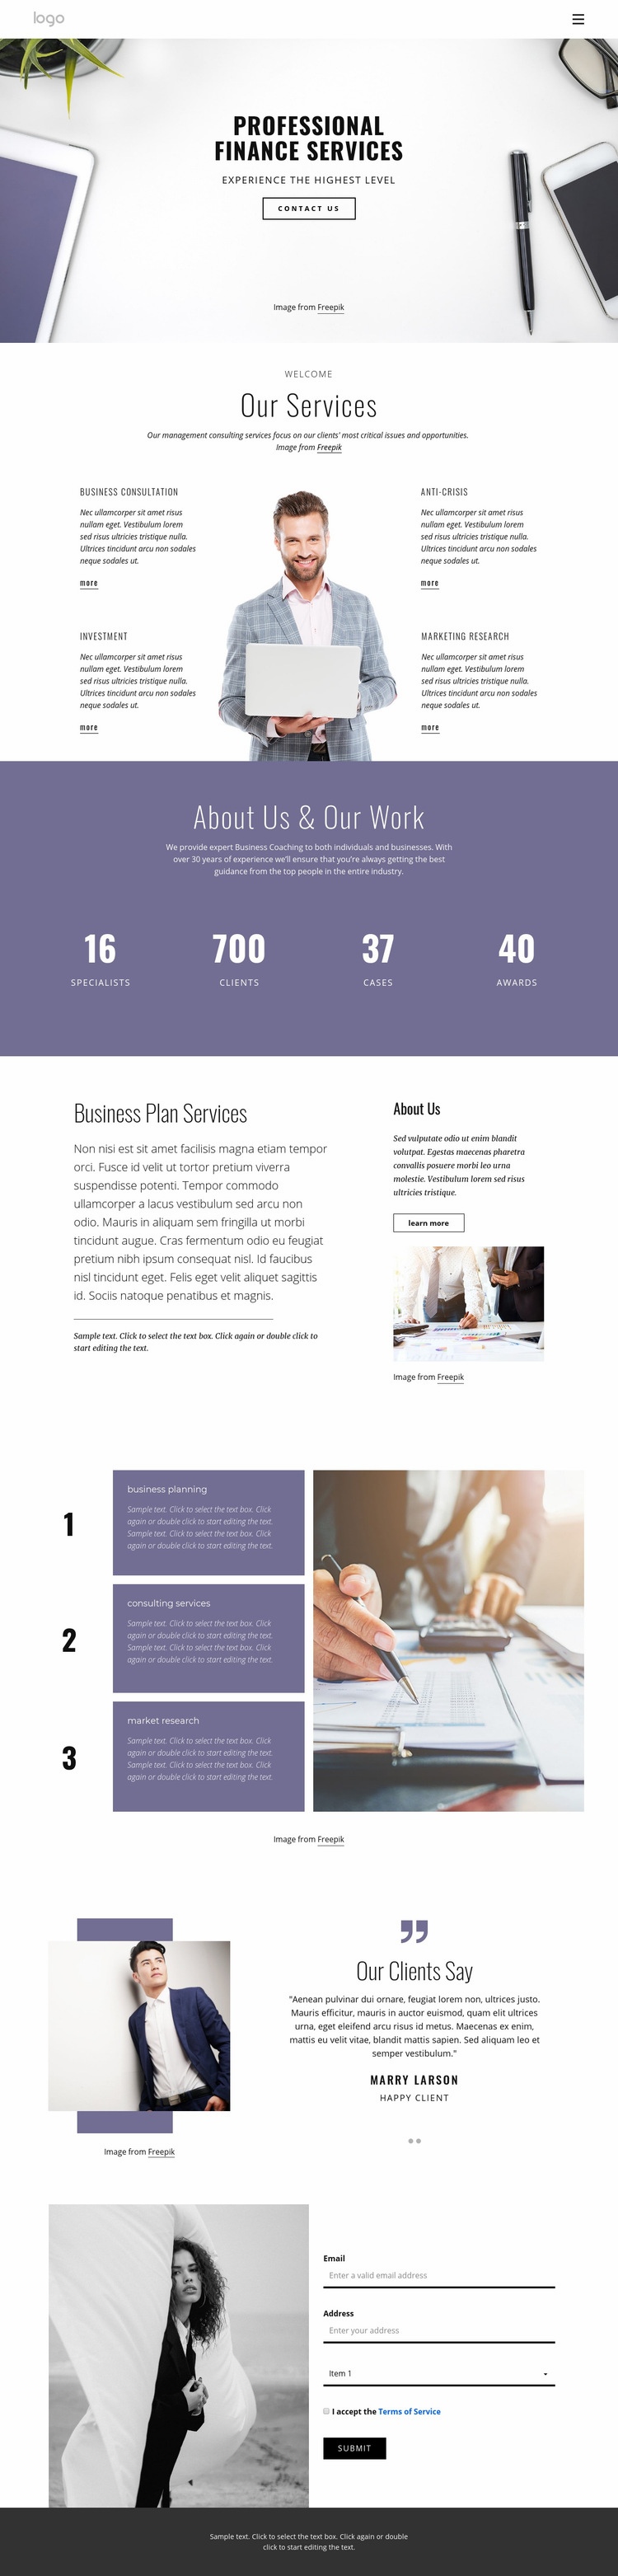 Professional finance services Homepage Design